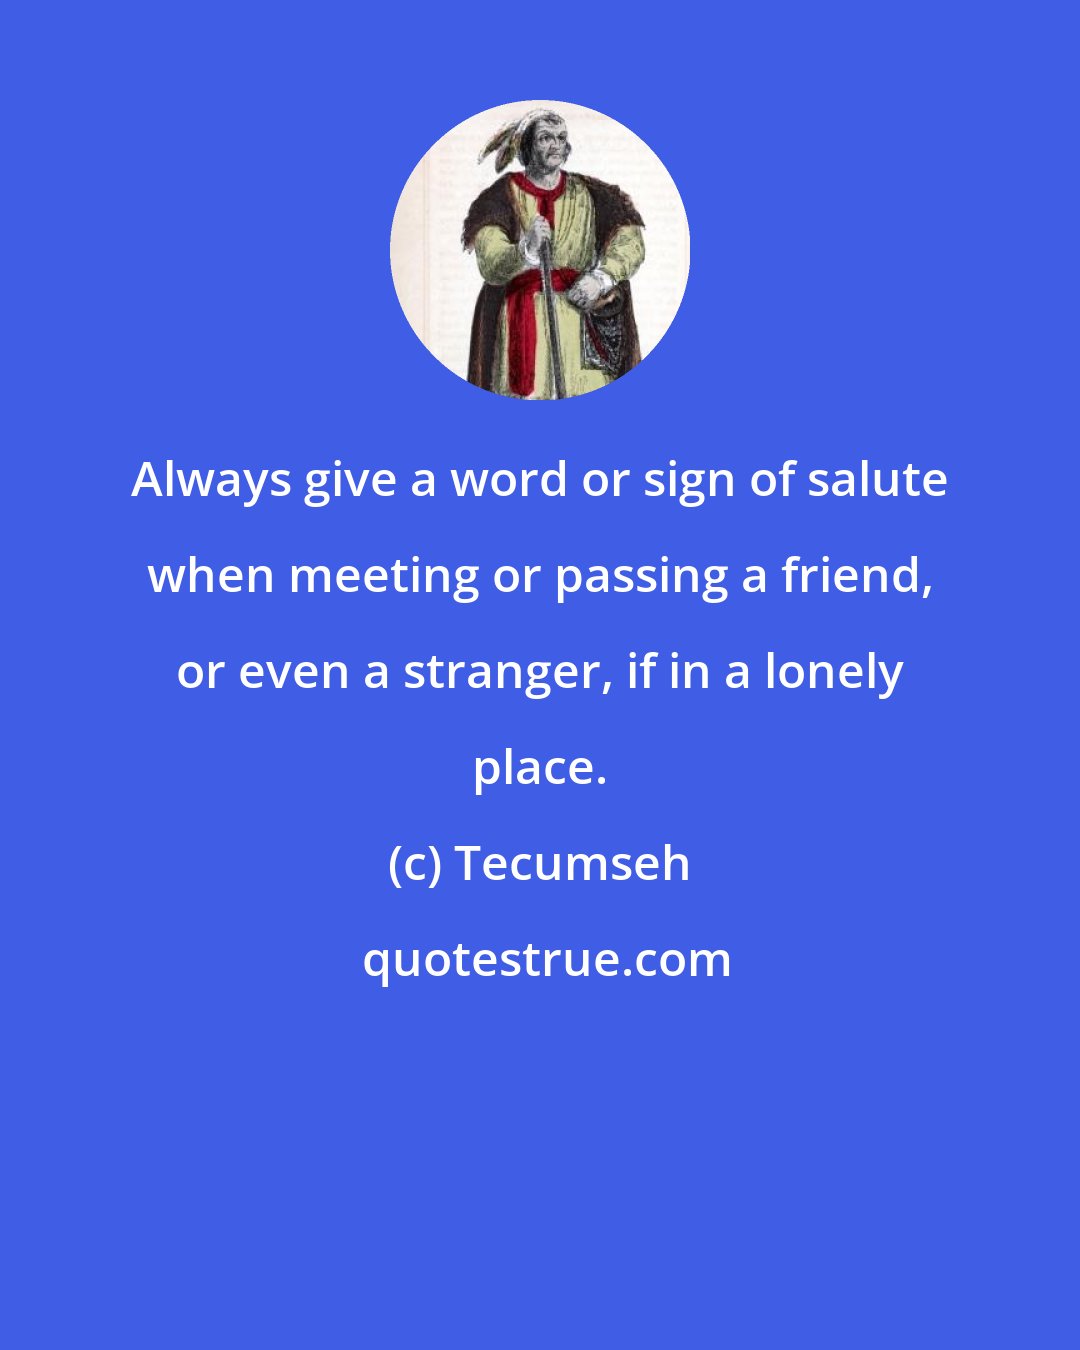 Tecumseh: Always give a word or sign of salute when meeting or passing a friend, or even a stranger, if in a lonely place.